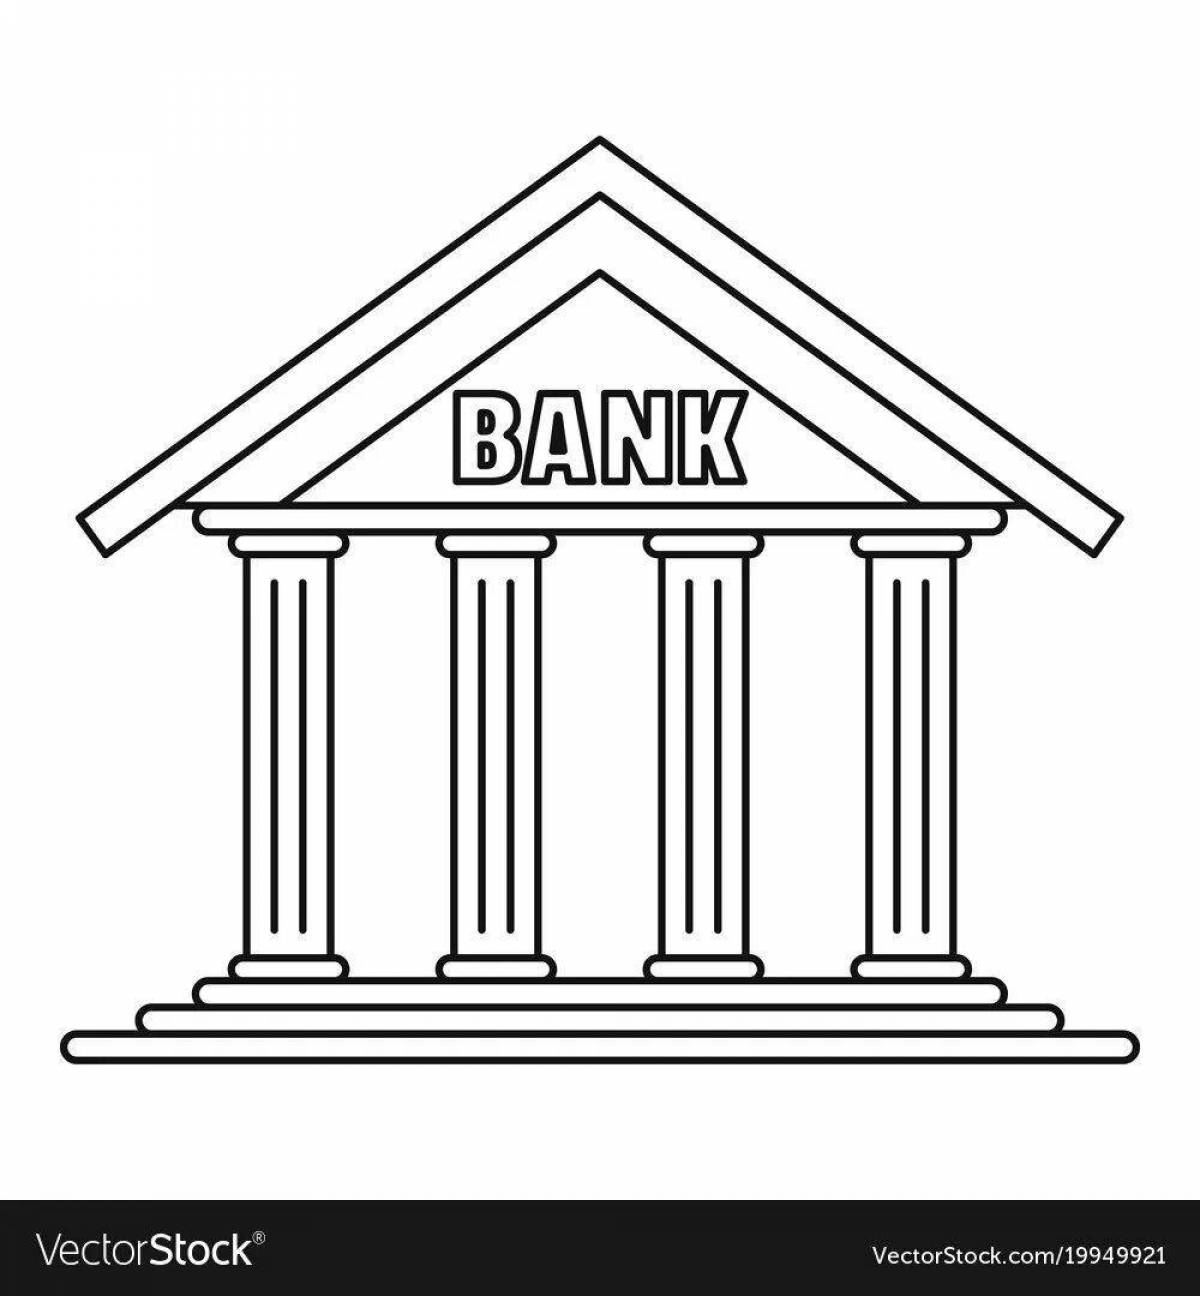 Adorable bank coloring book for kids